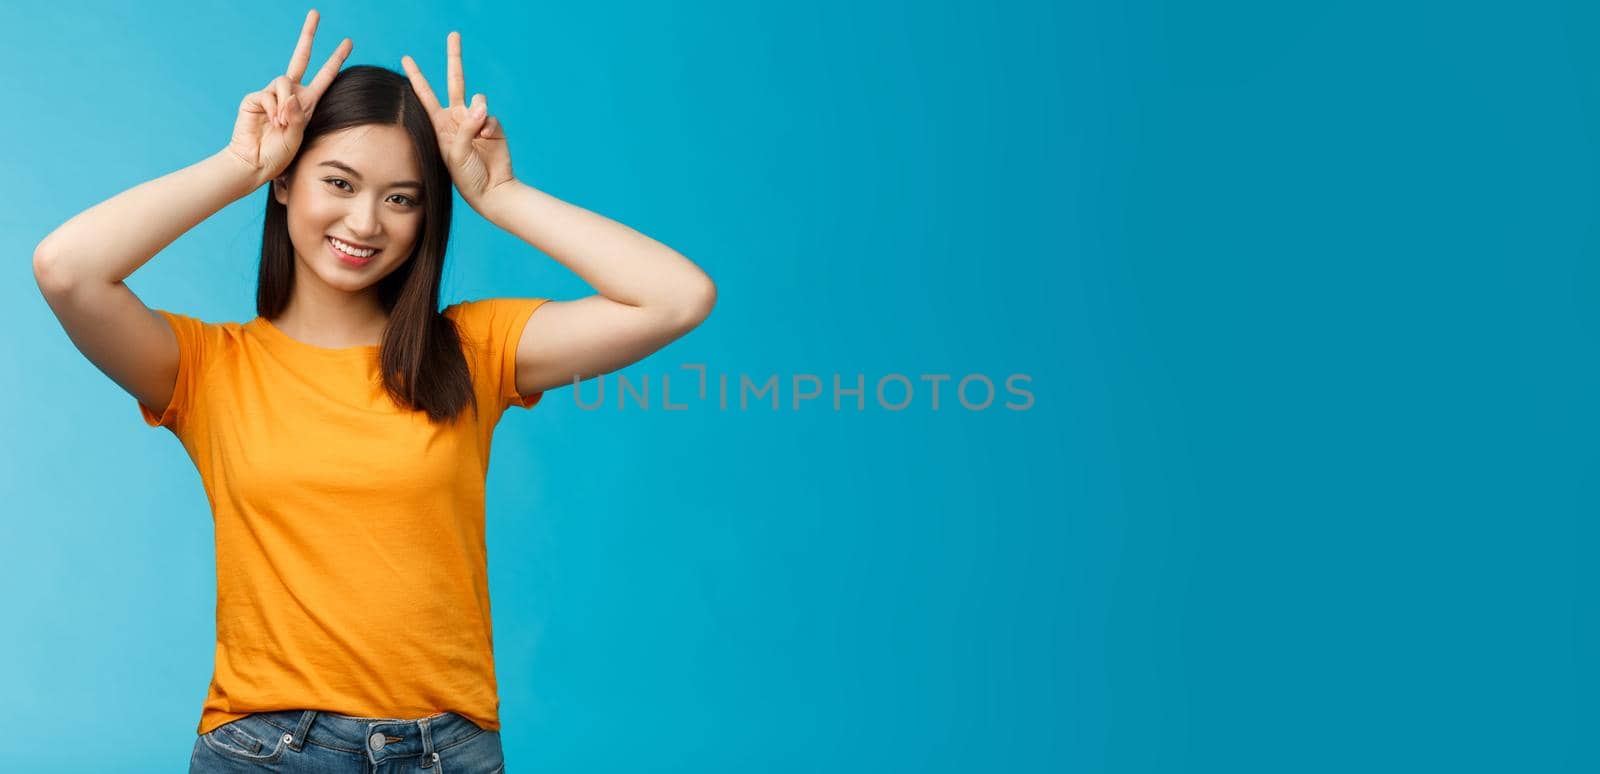 Cute tender asian girlfriend act silly lovely smile, tilt head show playfully ears hold peace victory signs on head, grinning toothy, express joy happiness and delight, stand blue background.